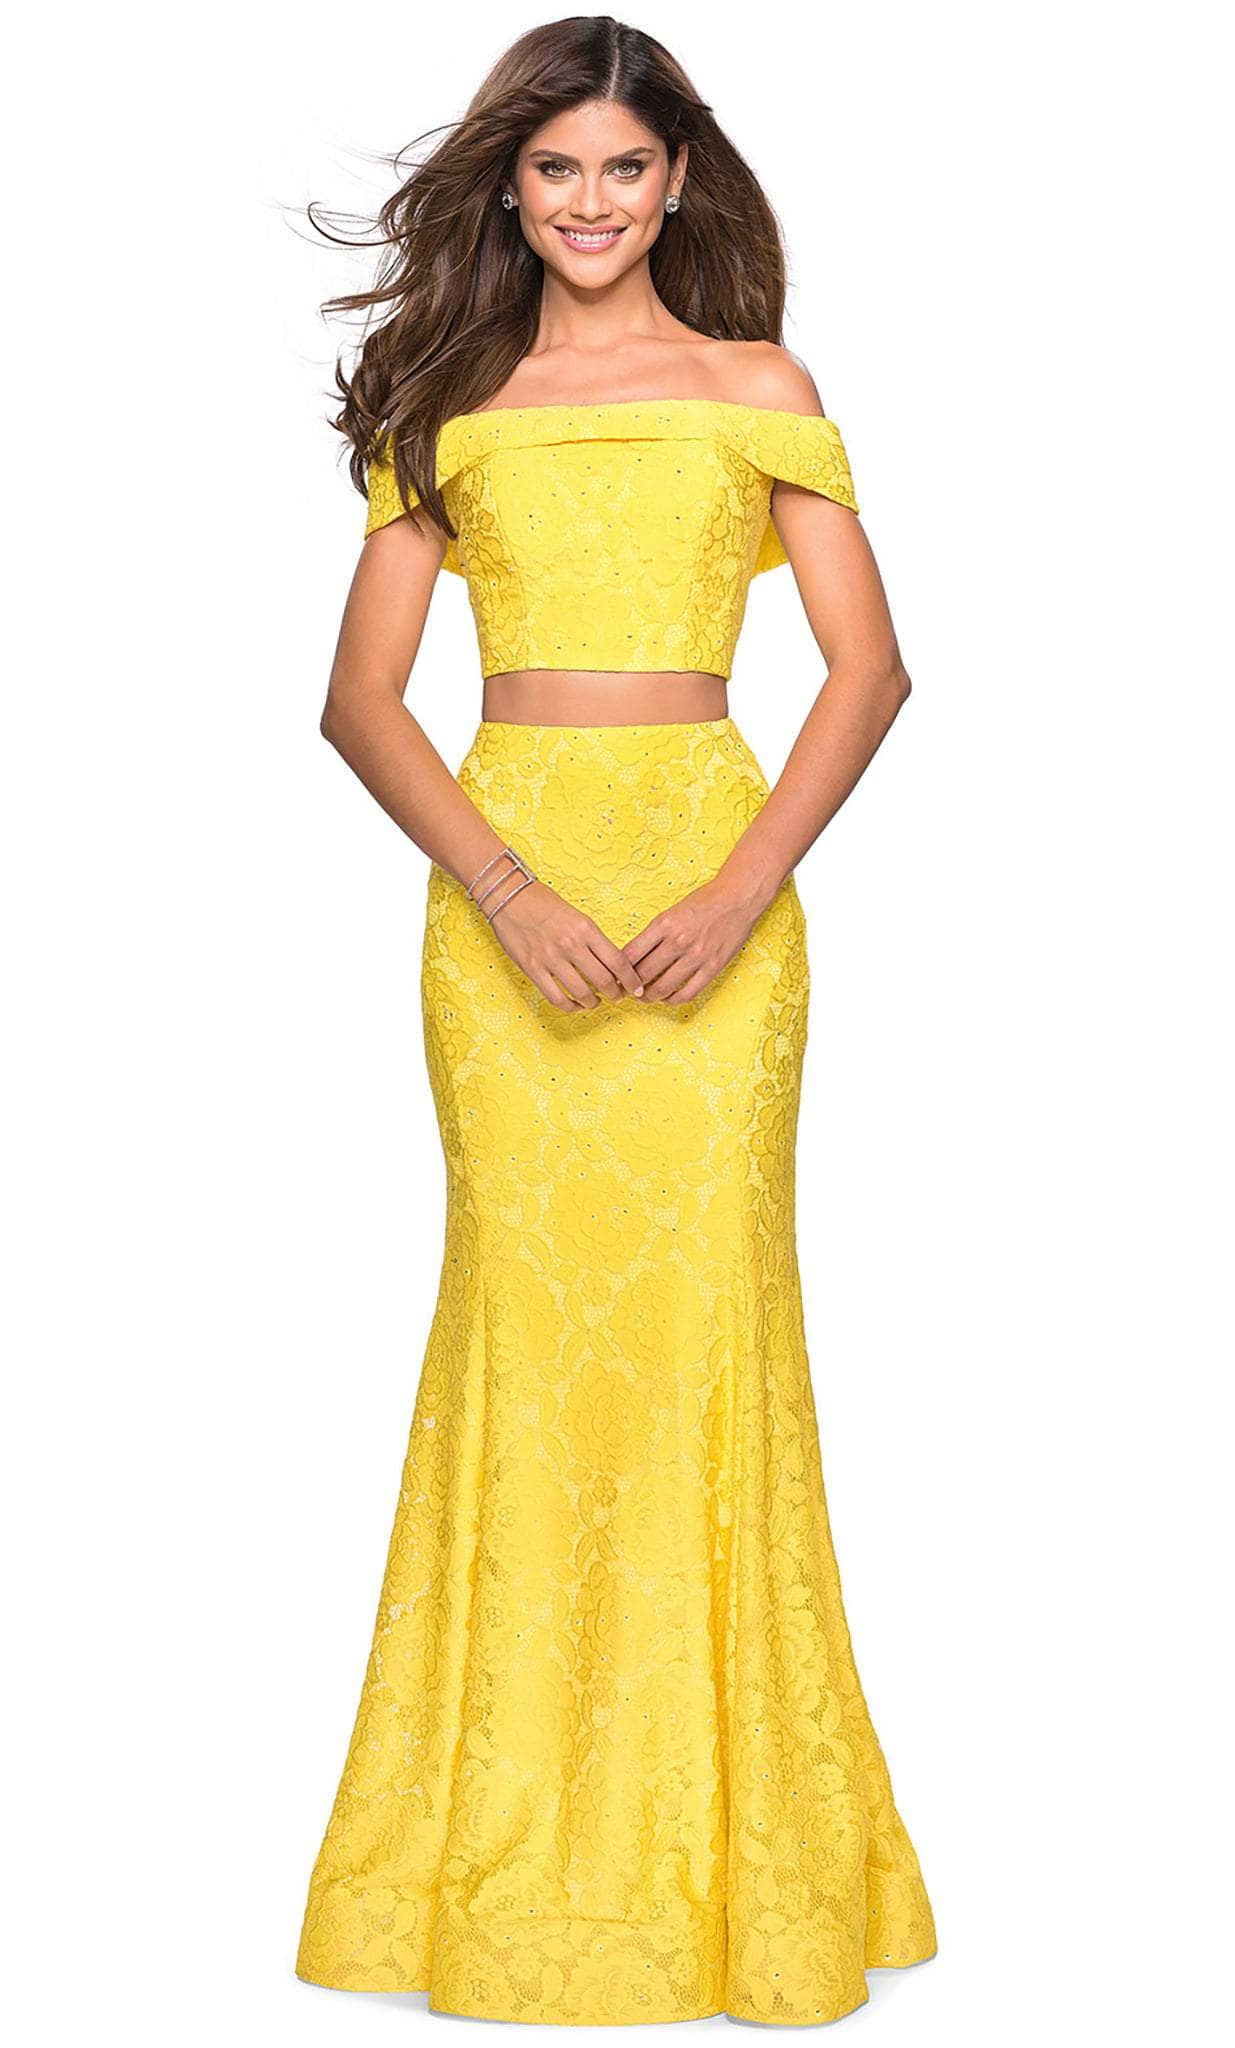 La Femme - 27443 Two-Piece Allover Lace Off Shoulder Mermaid Gown Formal Gowns 00 / Yellow